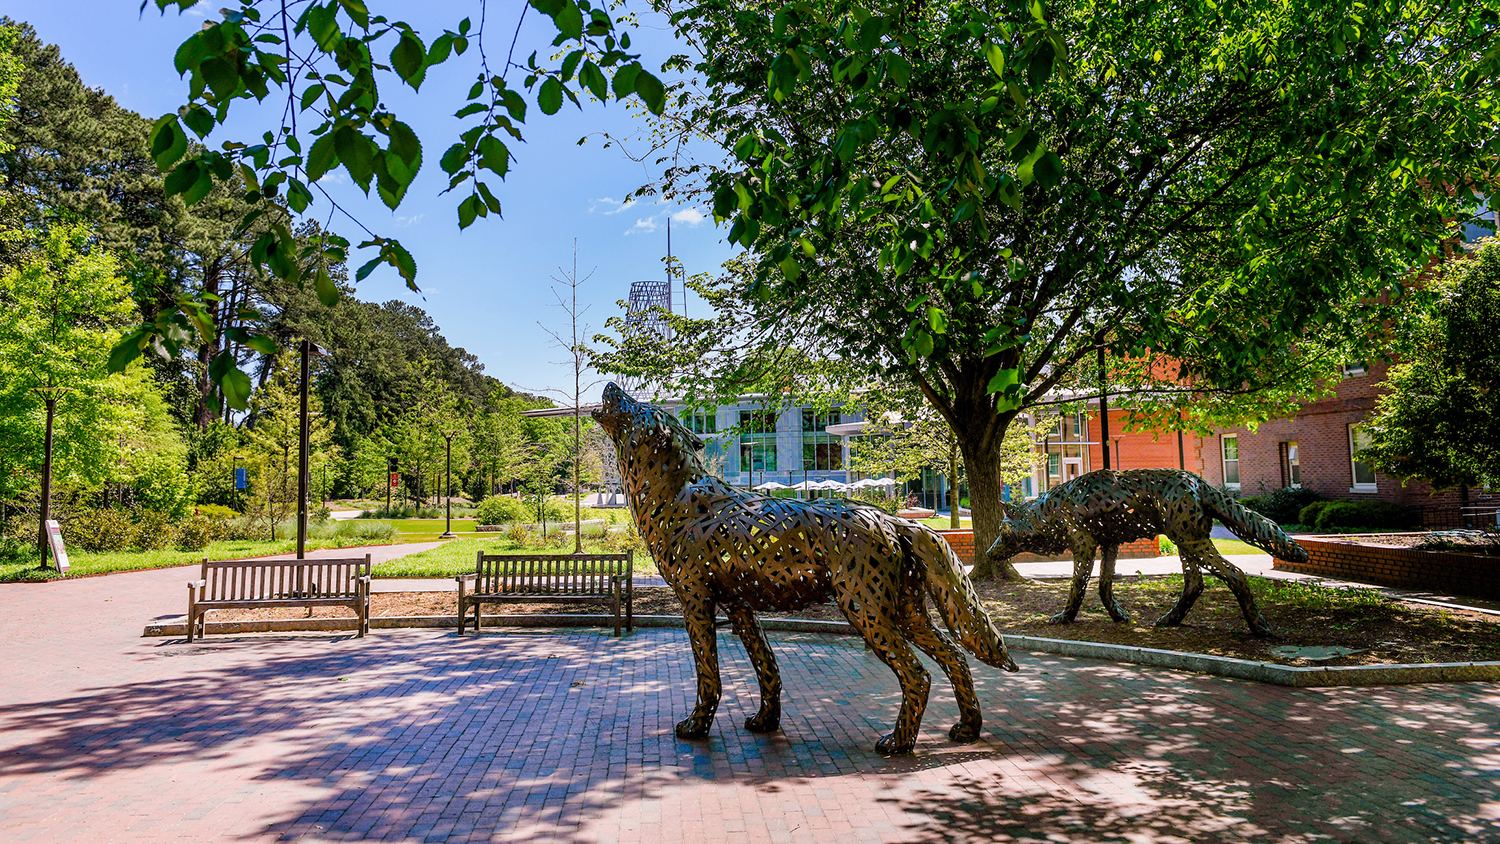 Copper wolves stand by the walkway to Stafford Commons and Talley Student Center. Photo by Becky Kirkland.